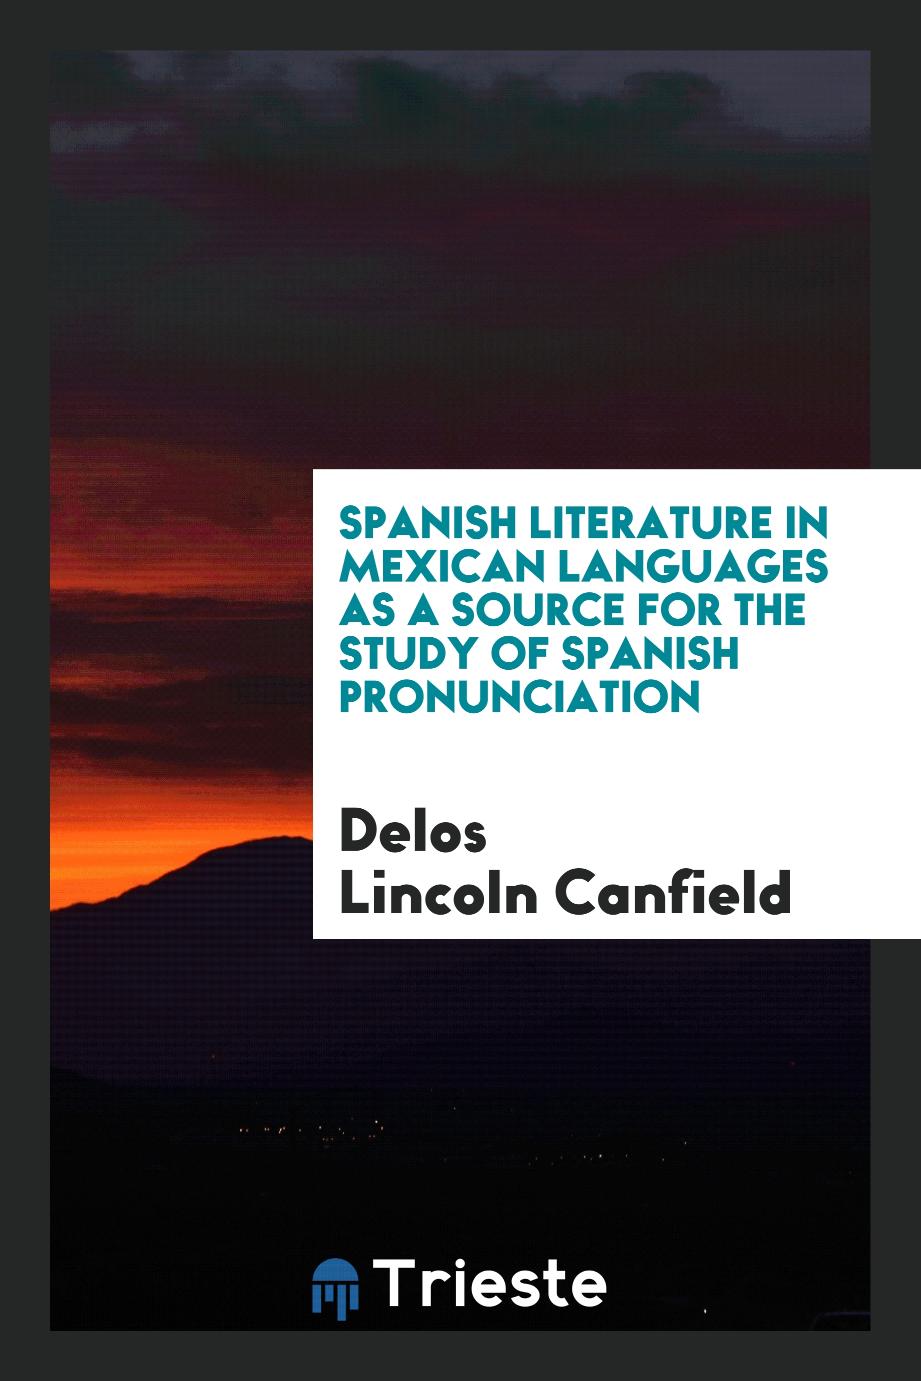 Spanish literature in Mexican languages as a source for the study of Spanish pronunciation